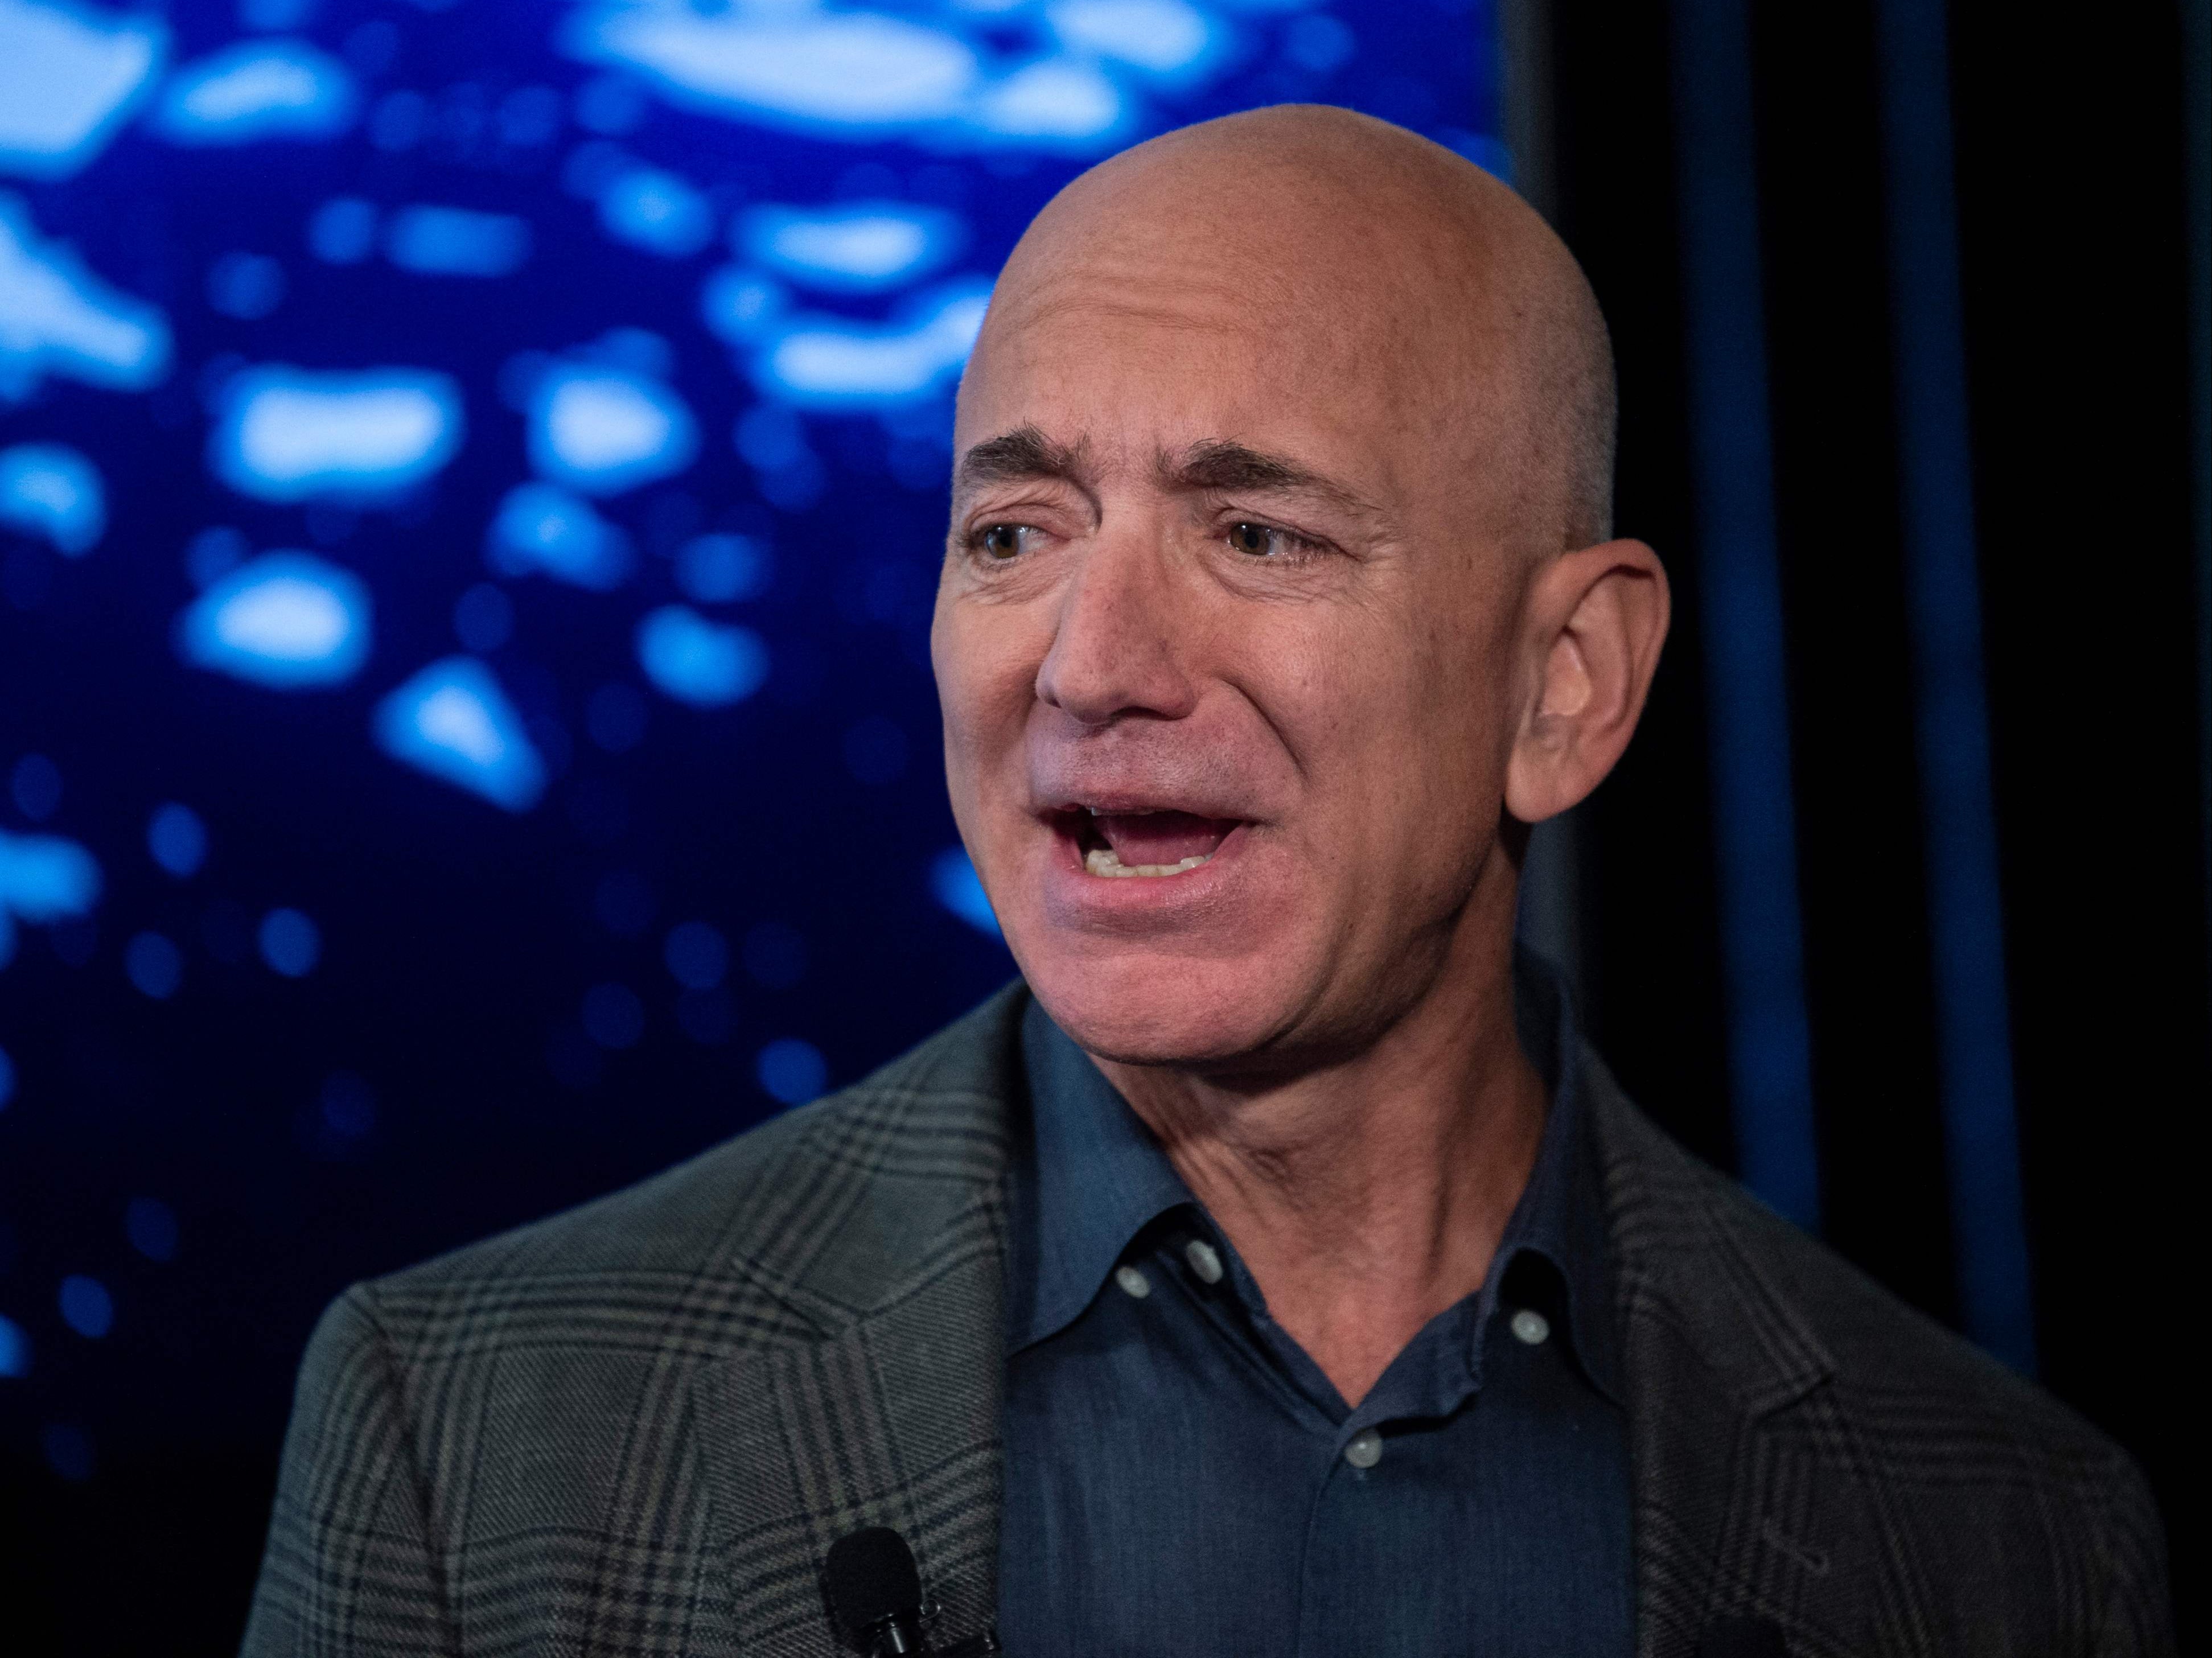 Jeff Bezos is moving into the role of executive chair at the company